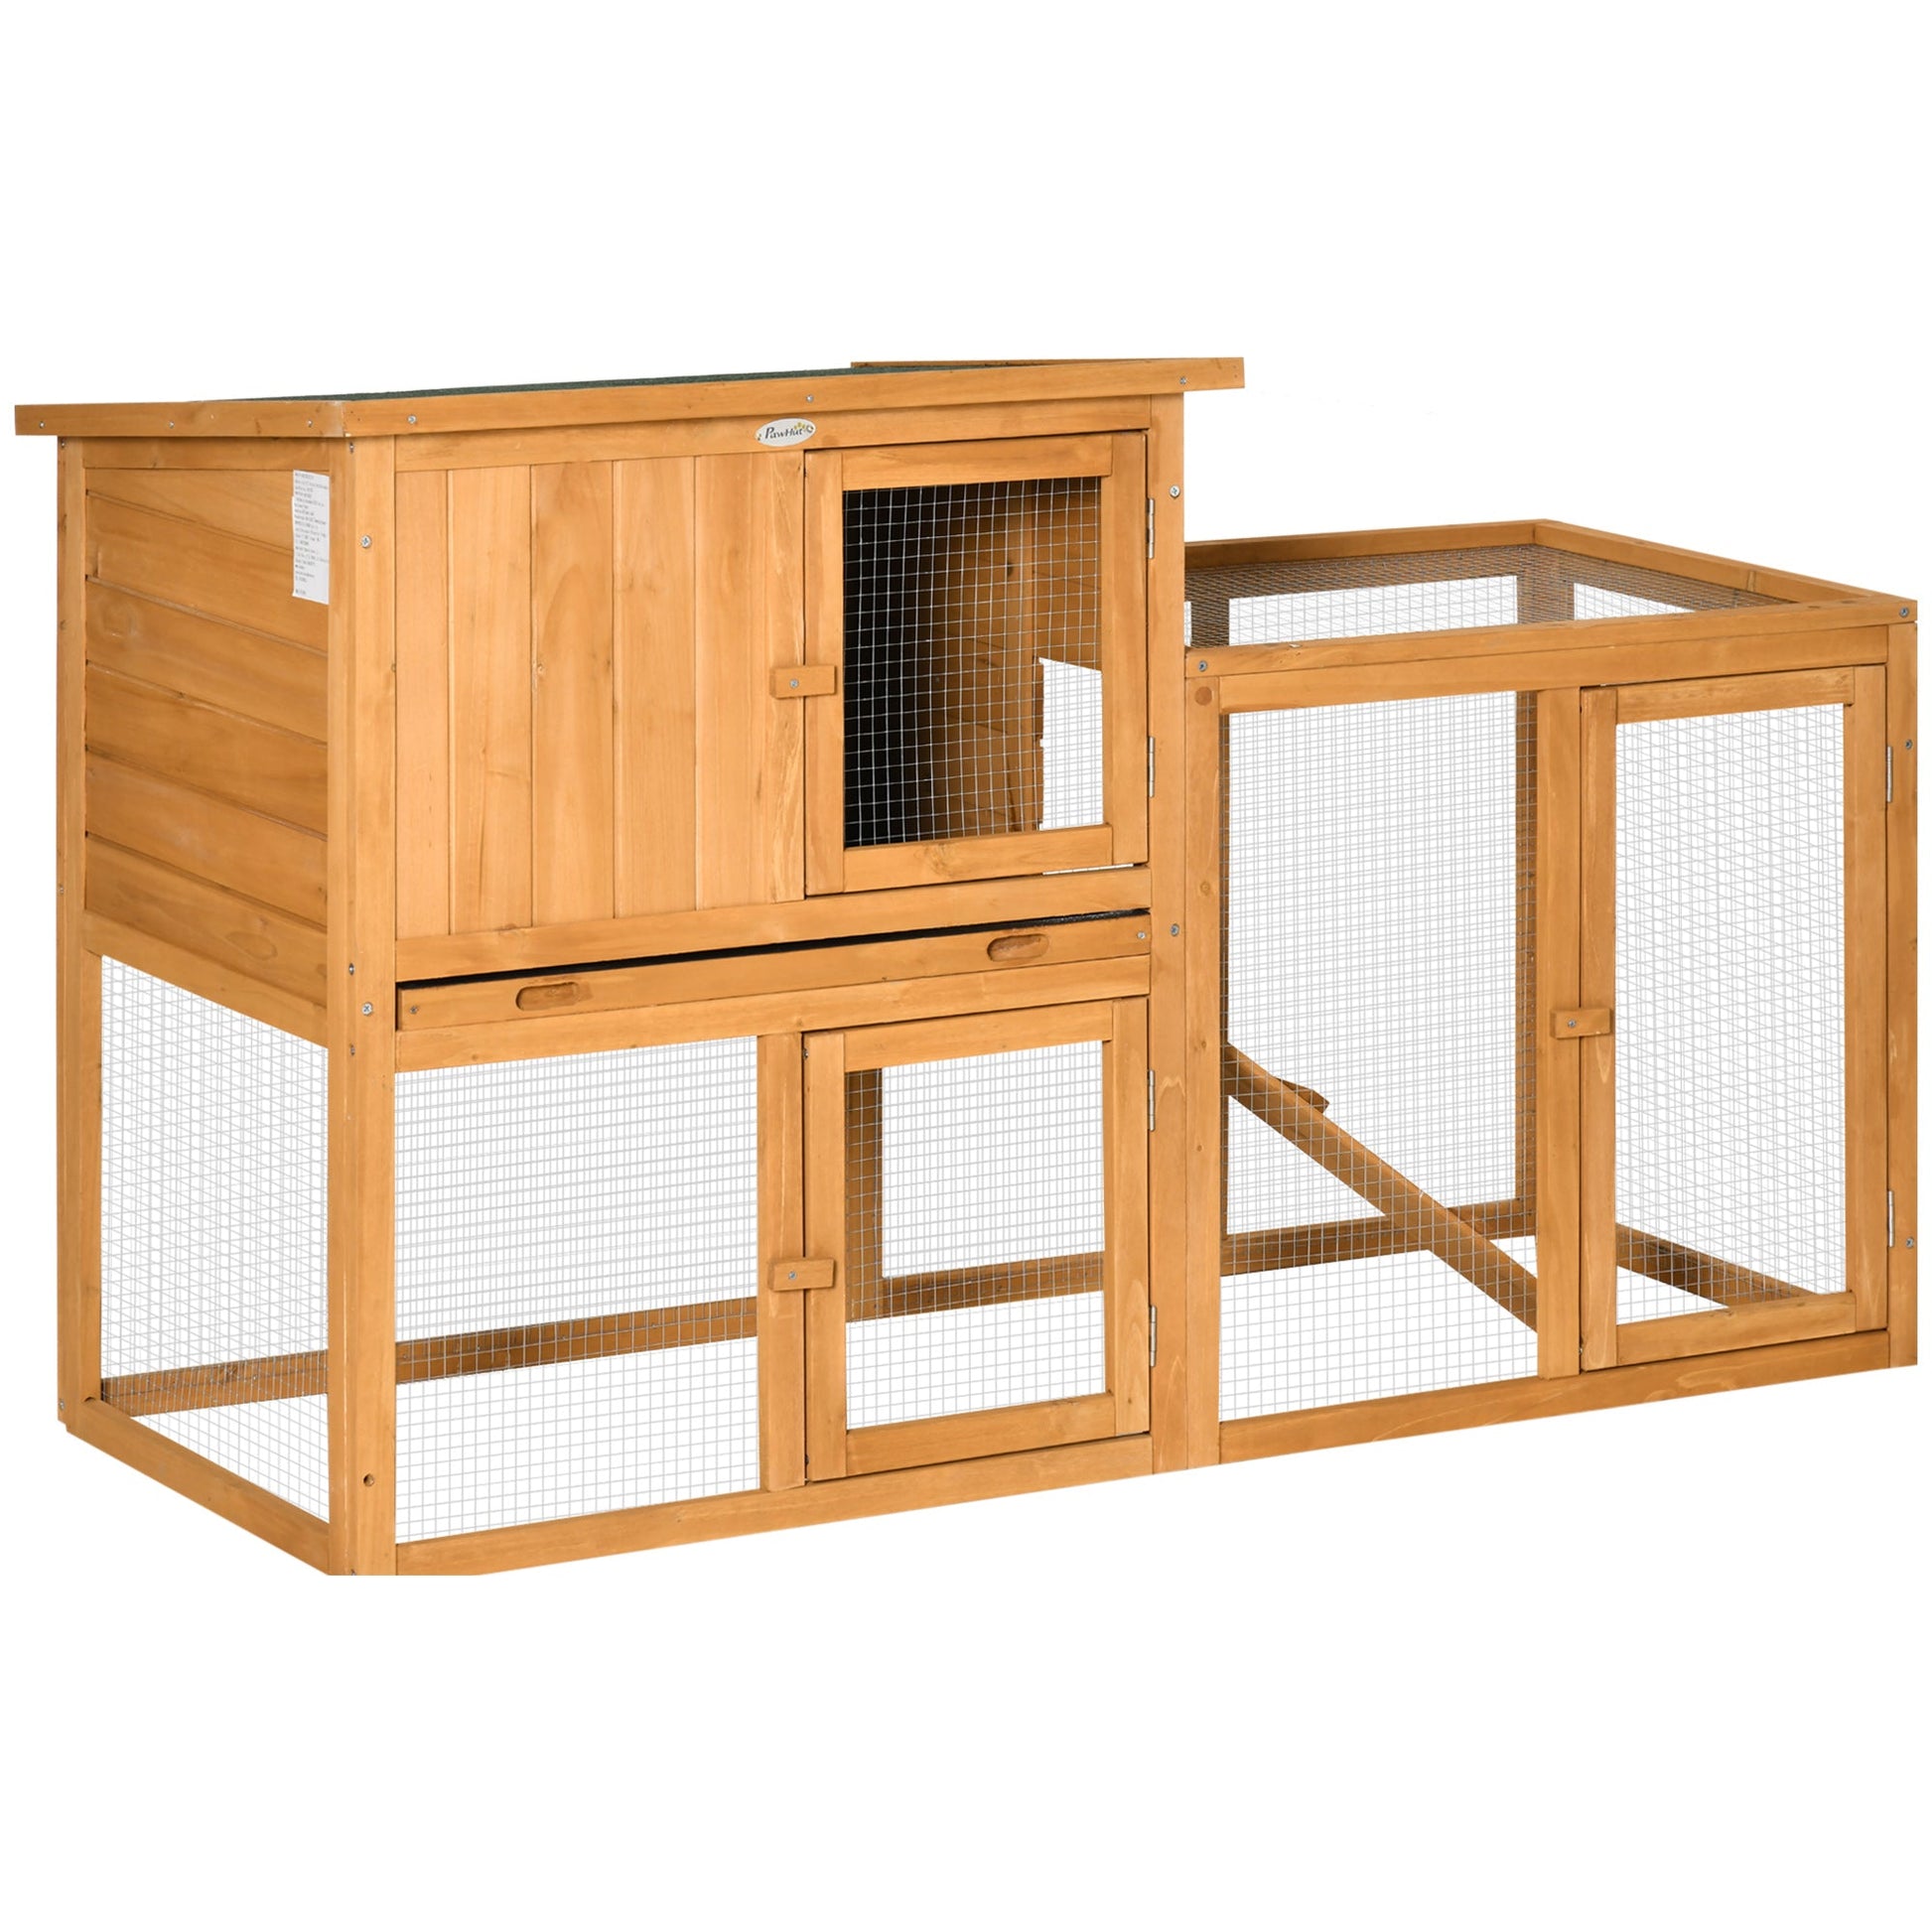 55.5" Wooden Rabbit Hutch 2 Tier Bunny House Pet Playpen Enclosure for Indoor Outdoor with Openable Roof, Slide-out Tray, Ramp, for Rabbits and Small Animals, Orange at Gallery Canada